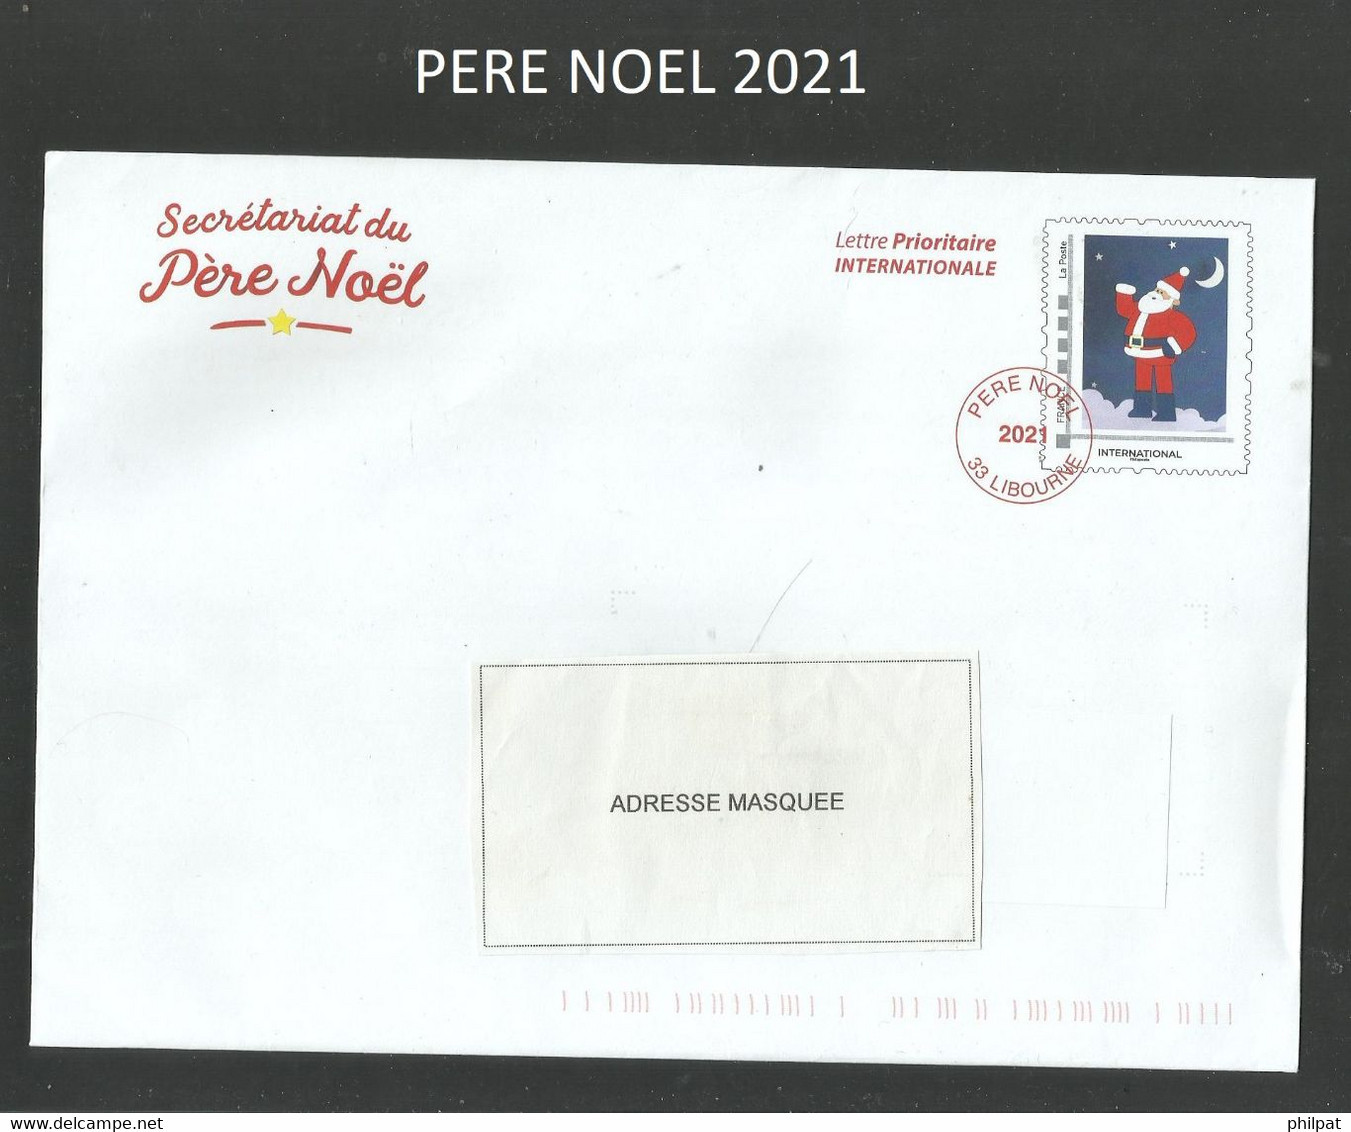 PAP PRET A POSTER HORS COMMERCE PERE NOEL 2021 LIBOURNE CHRISTMAS NAVIDAD - Prêts-à-poster:Stamped On Demand & Semi-official Overprinting (1995-...)